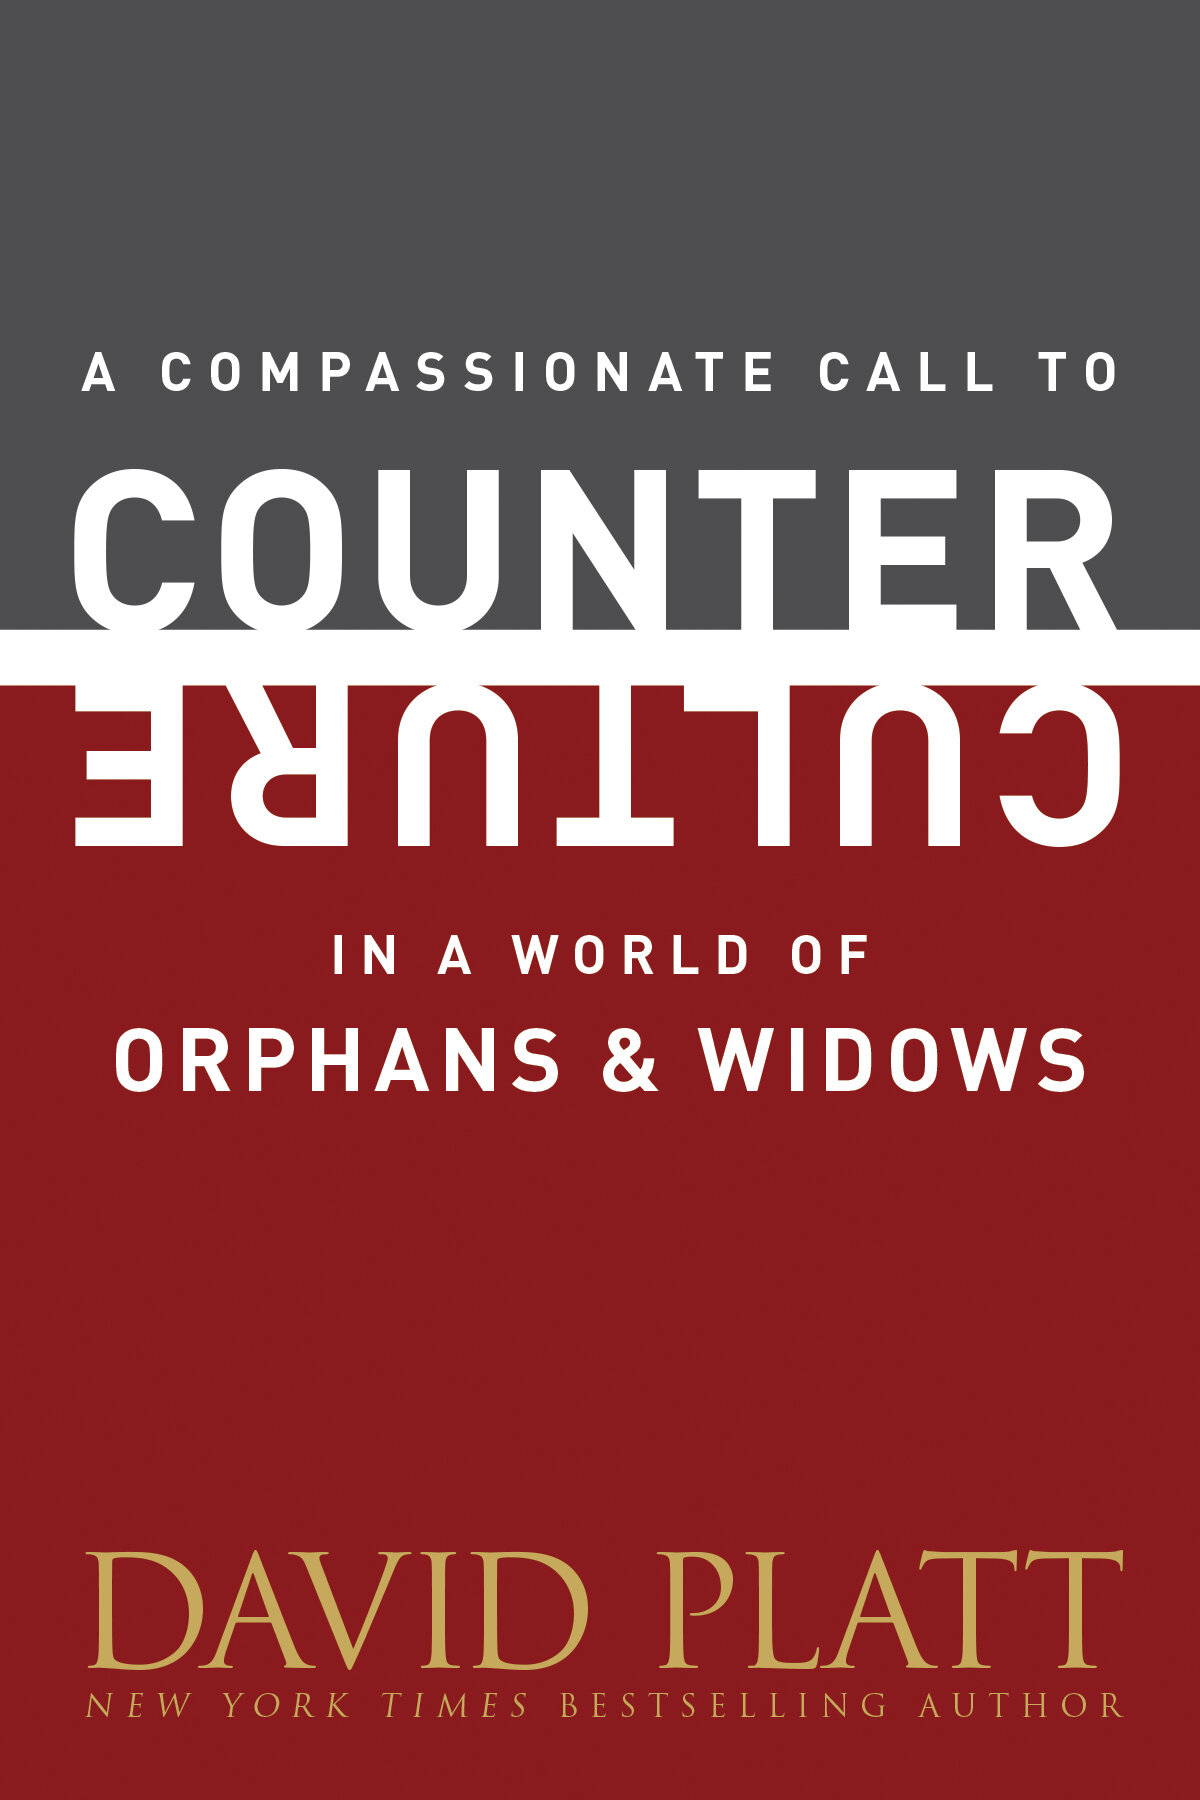 A Compassionate Call to Counter Culture in a World of Orphans and Widows